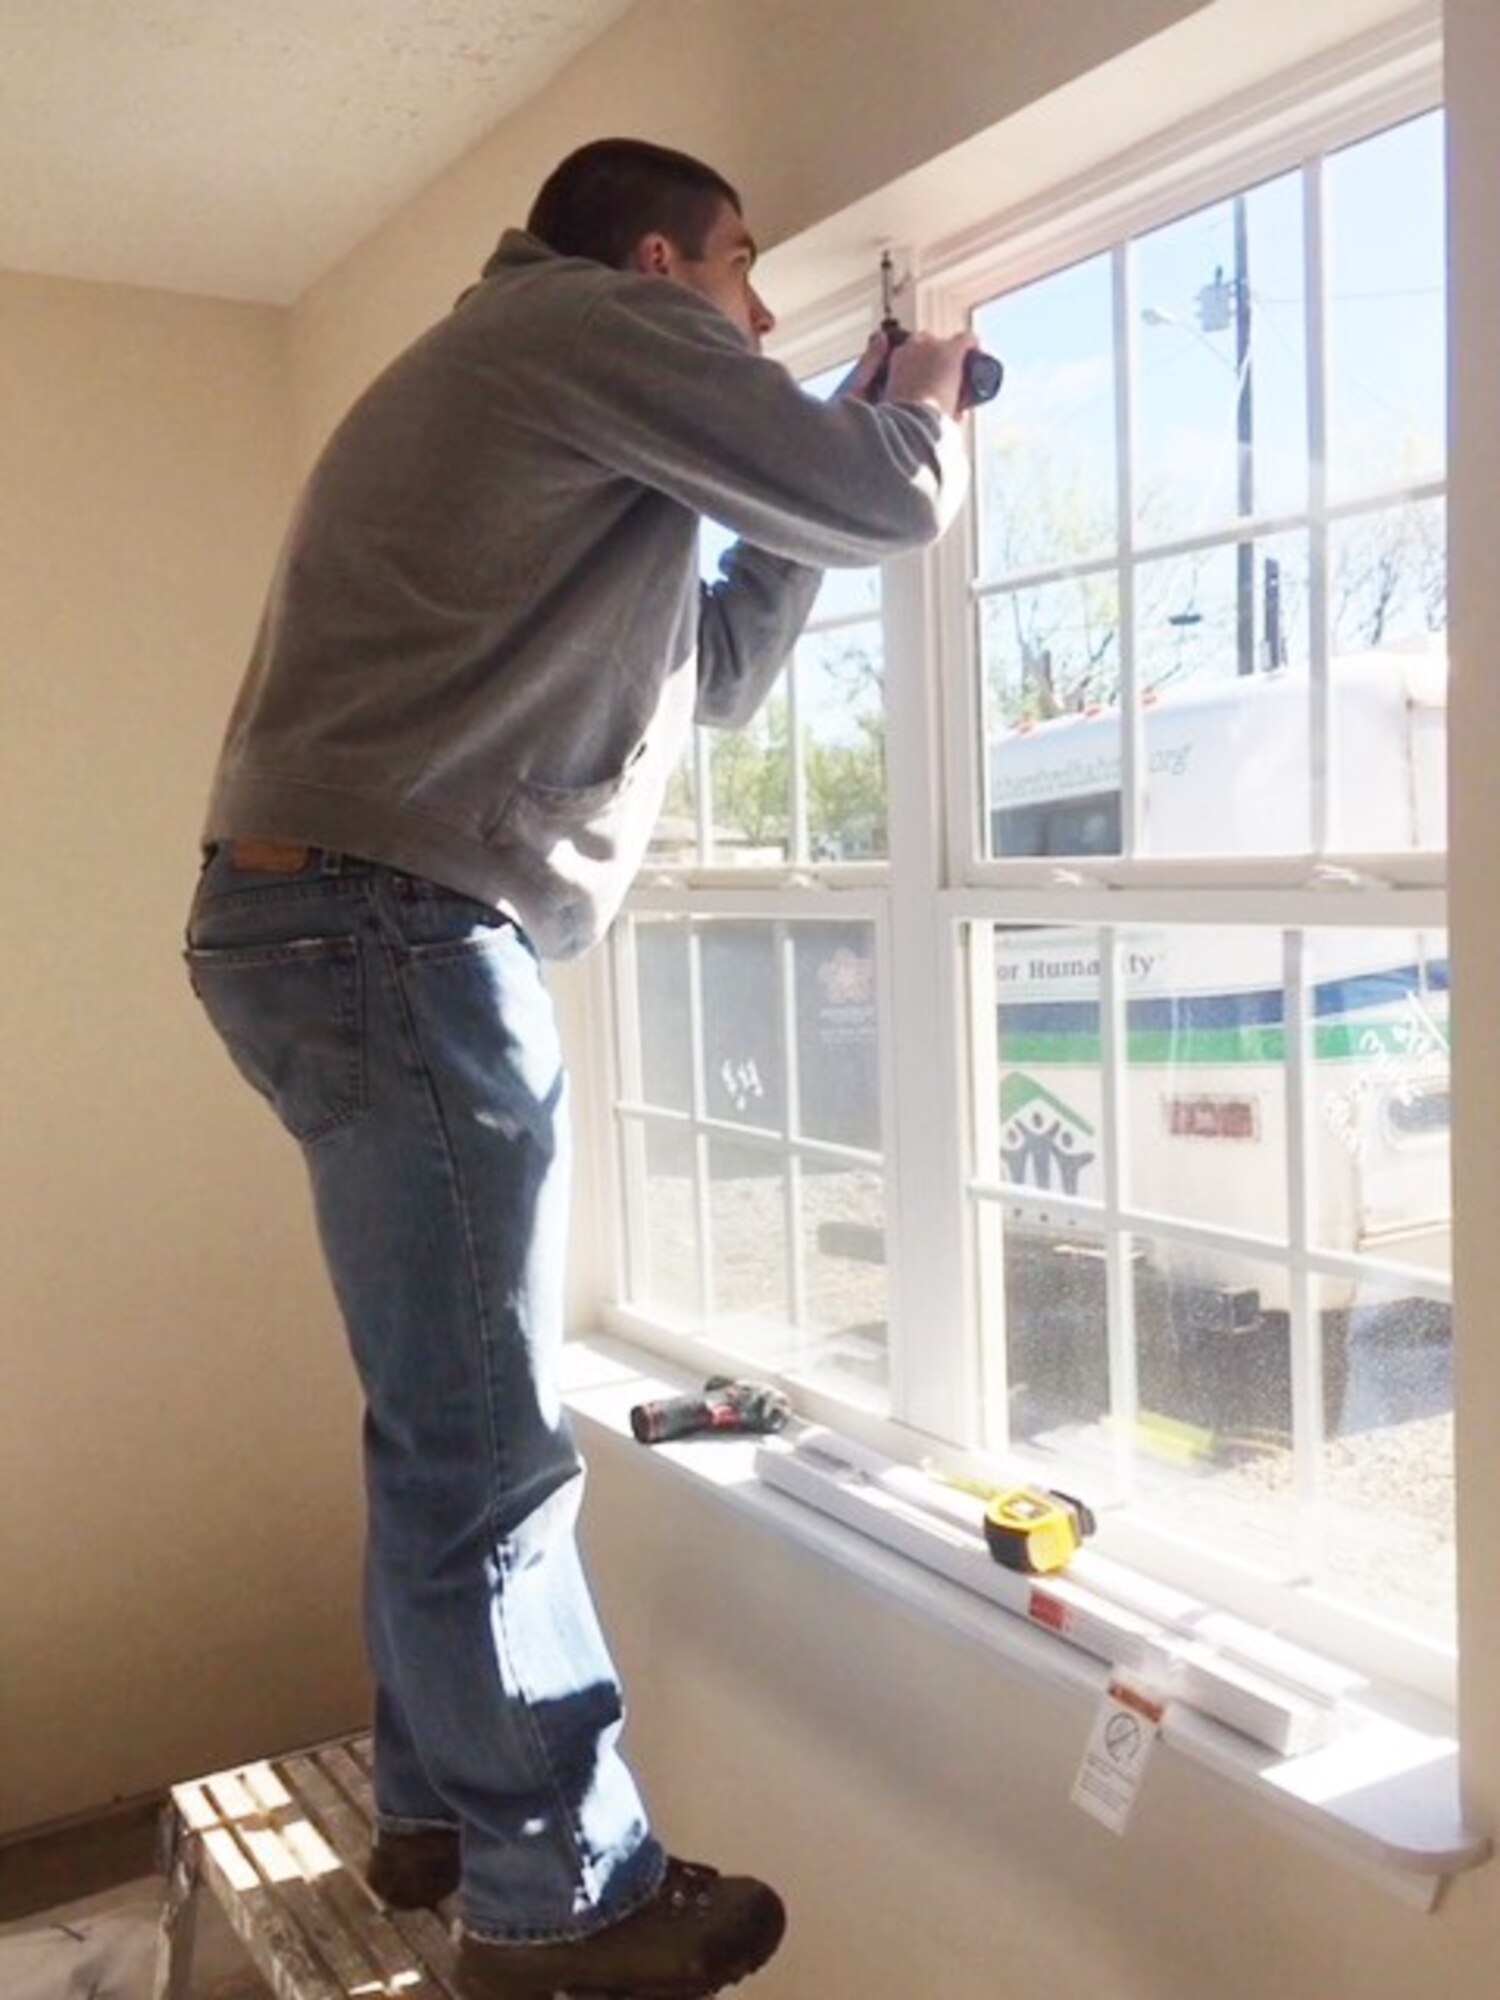 1st Lt. Adam McKenzie, a member of the Arnold Air Force Base Company Grade Officer Council, installs clips for hanging blinds. Members of the CGOC recently volunteered with Rutherford County Area Habitat for Humanity and worked on two homes the Habitat is constructing in the area.